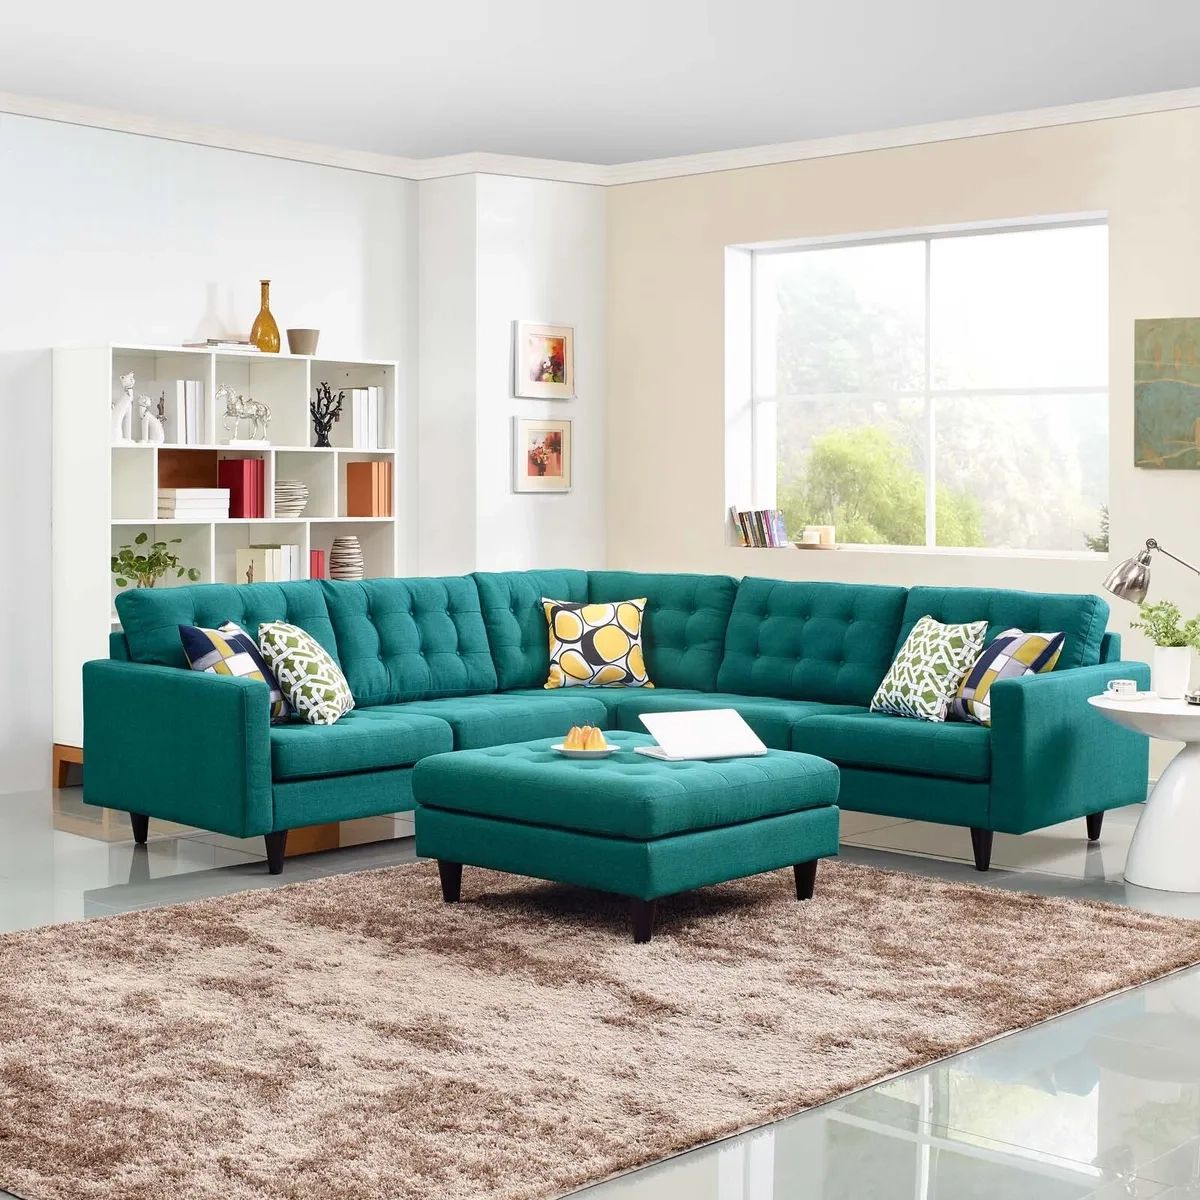 Modway Mid Century Modern Tufted Fabric Upholstered Sectional Sofa Set In  Teal | Ebay Regarding Tufted Upholstered Sofas (View 13 of 15)